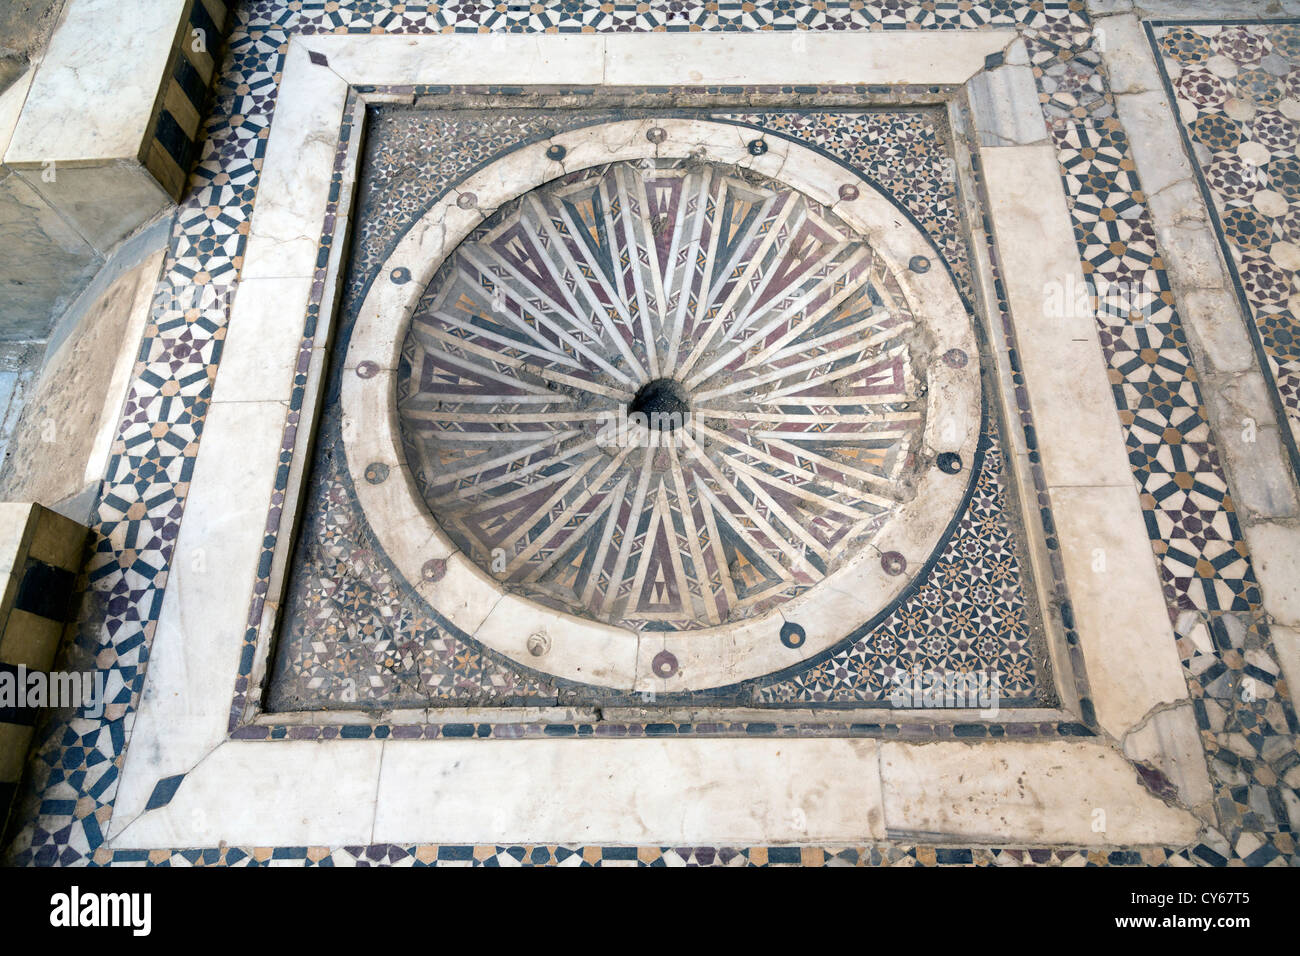 Detail of the inlaid marble basin, Complex of Qalawun, Cairo, Egypt Stock Photo